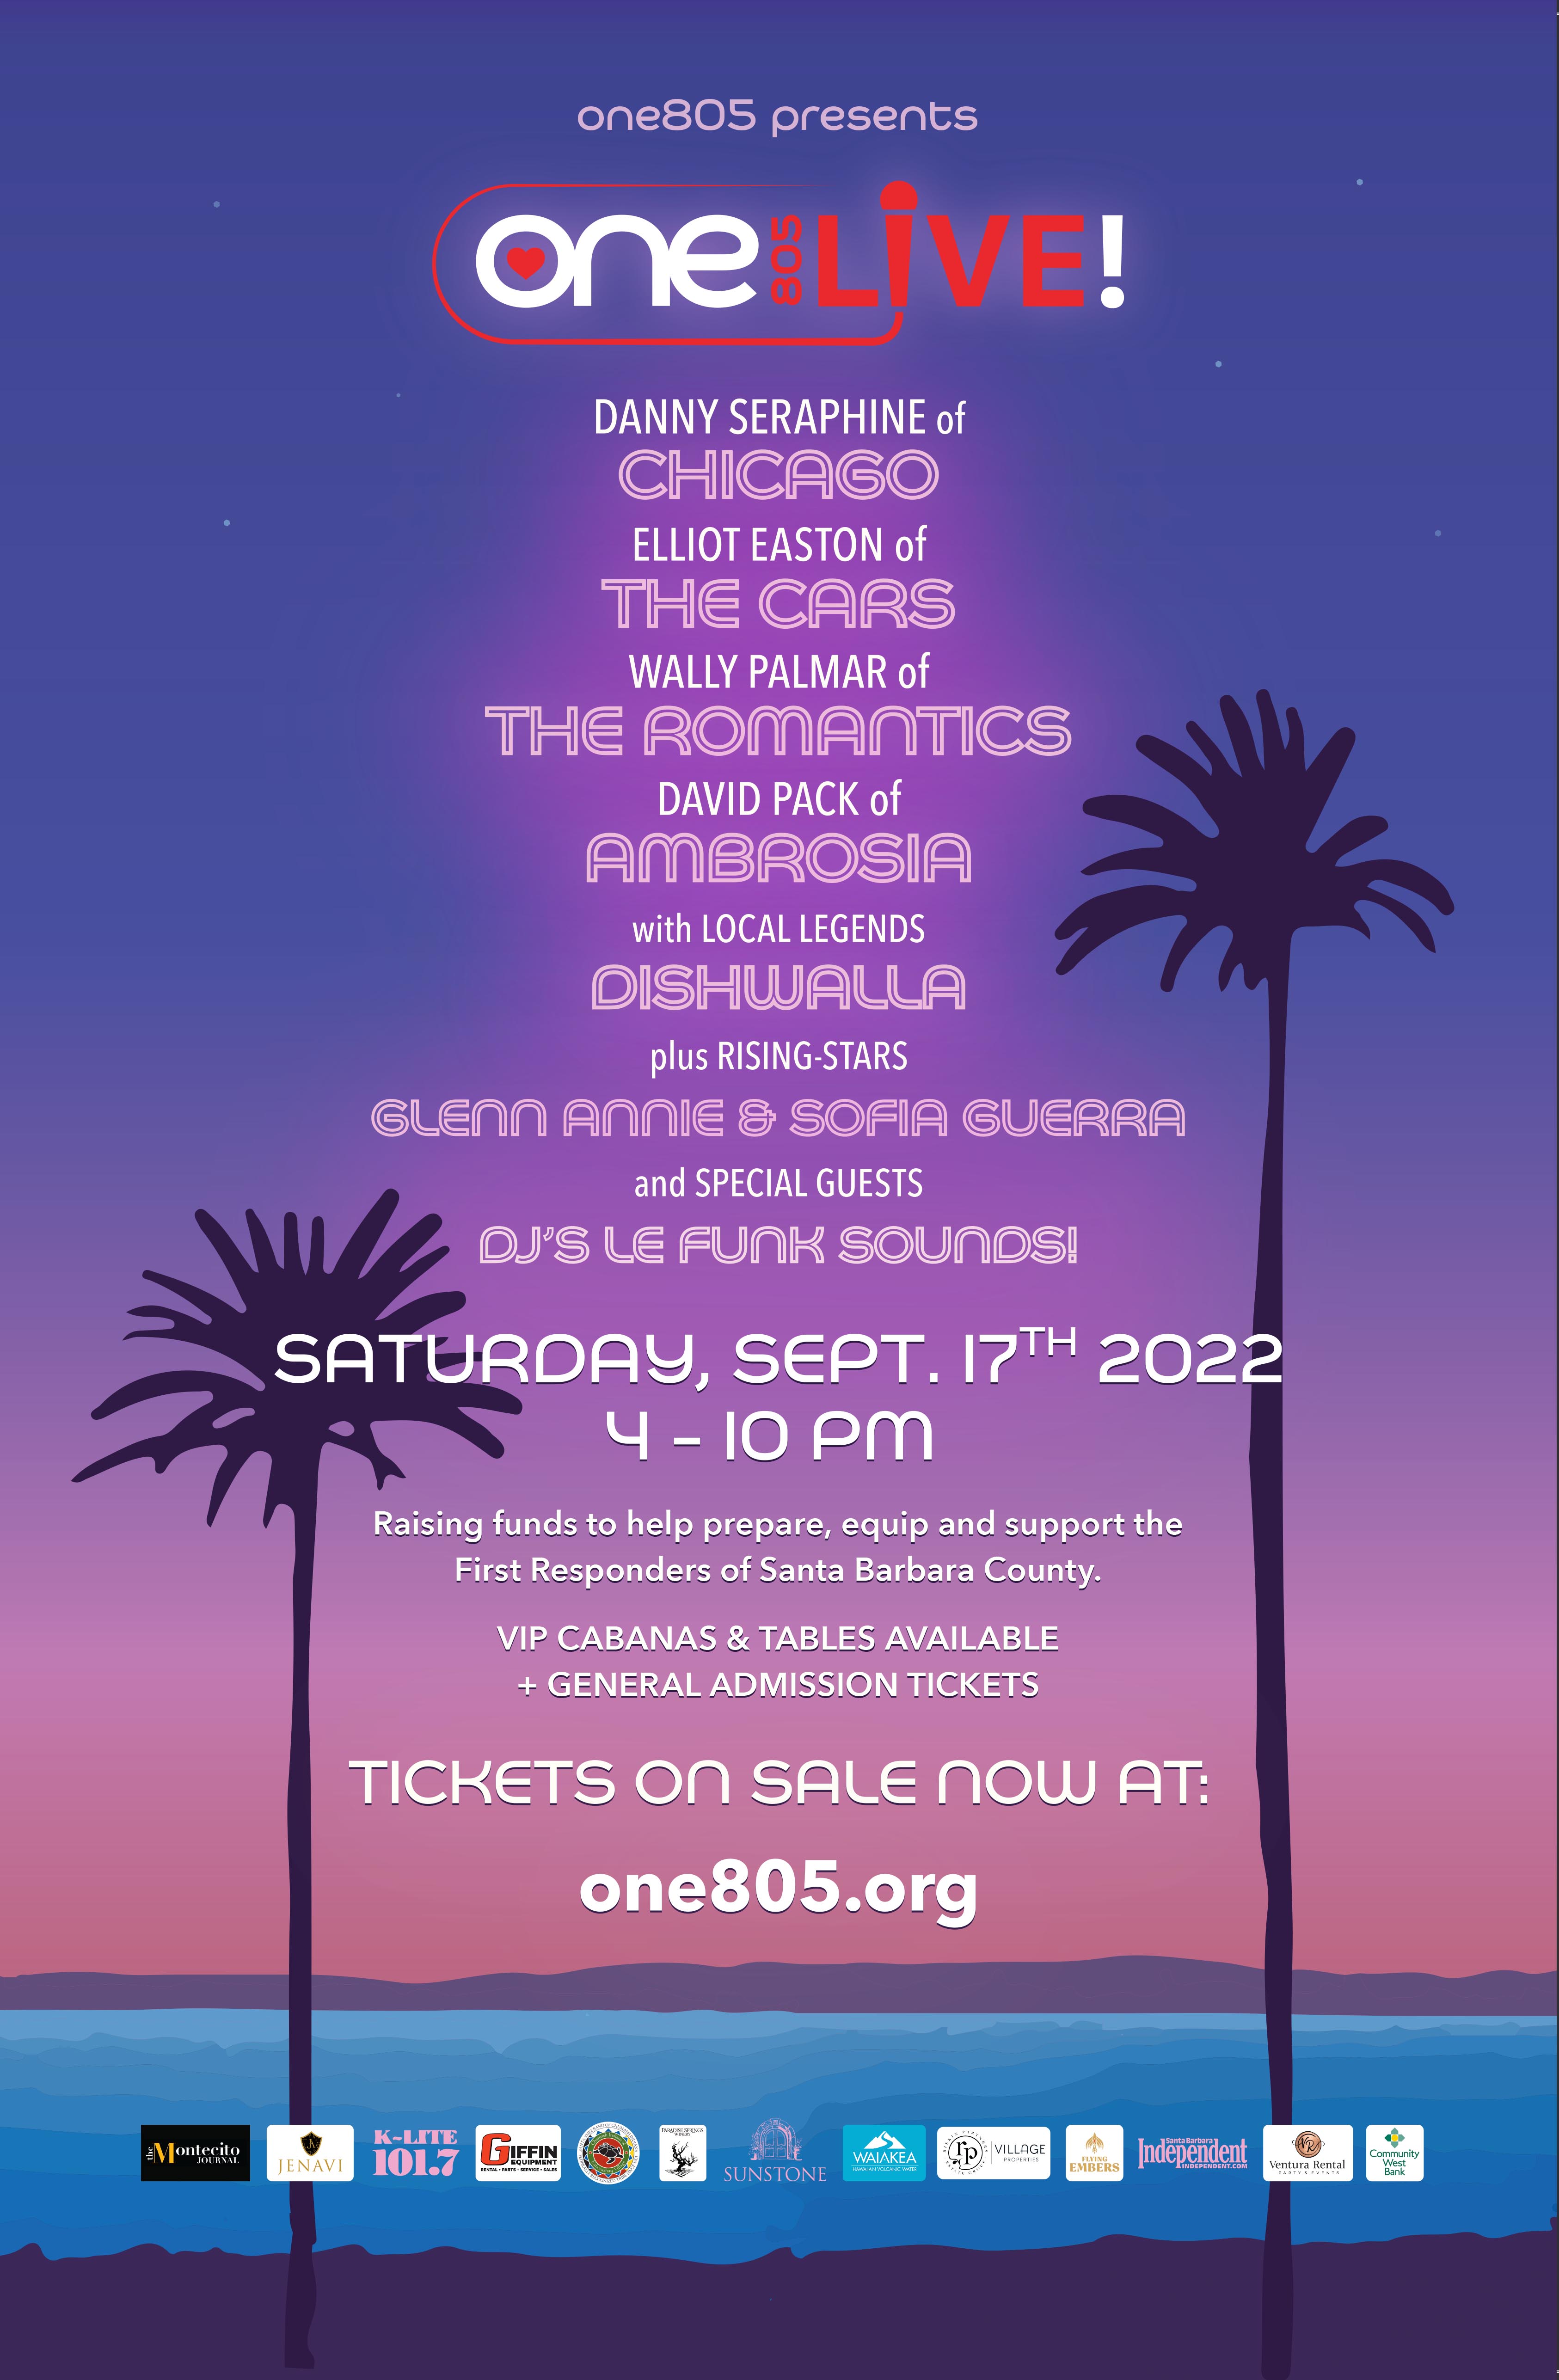 One805 Announces Awards and Talent Line-up for One805LIVE! Benefit Show